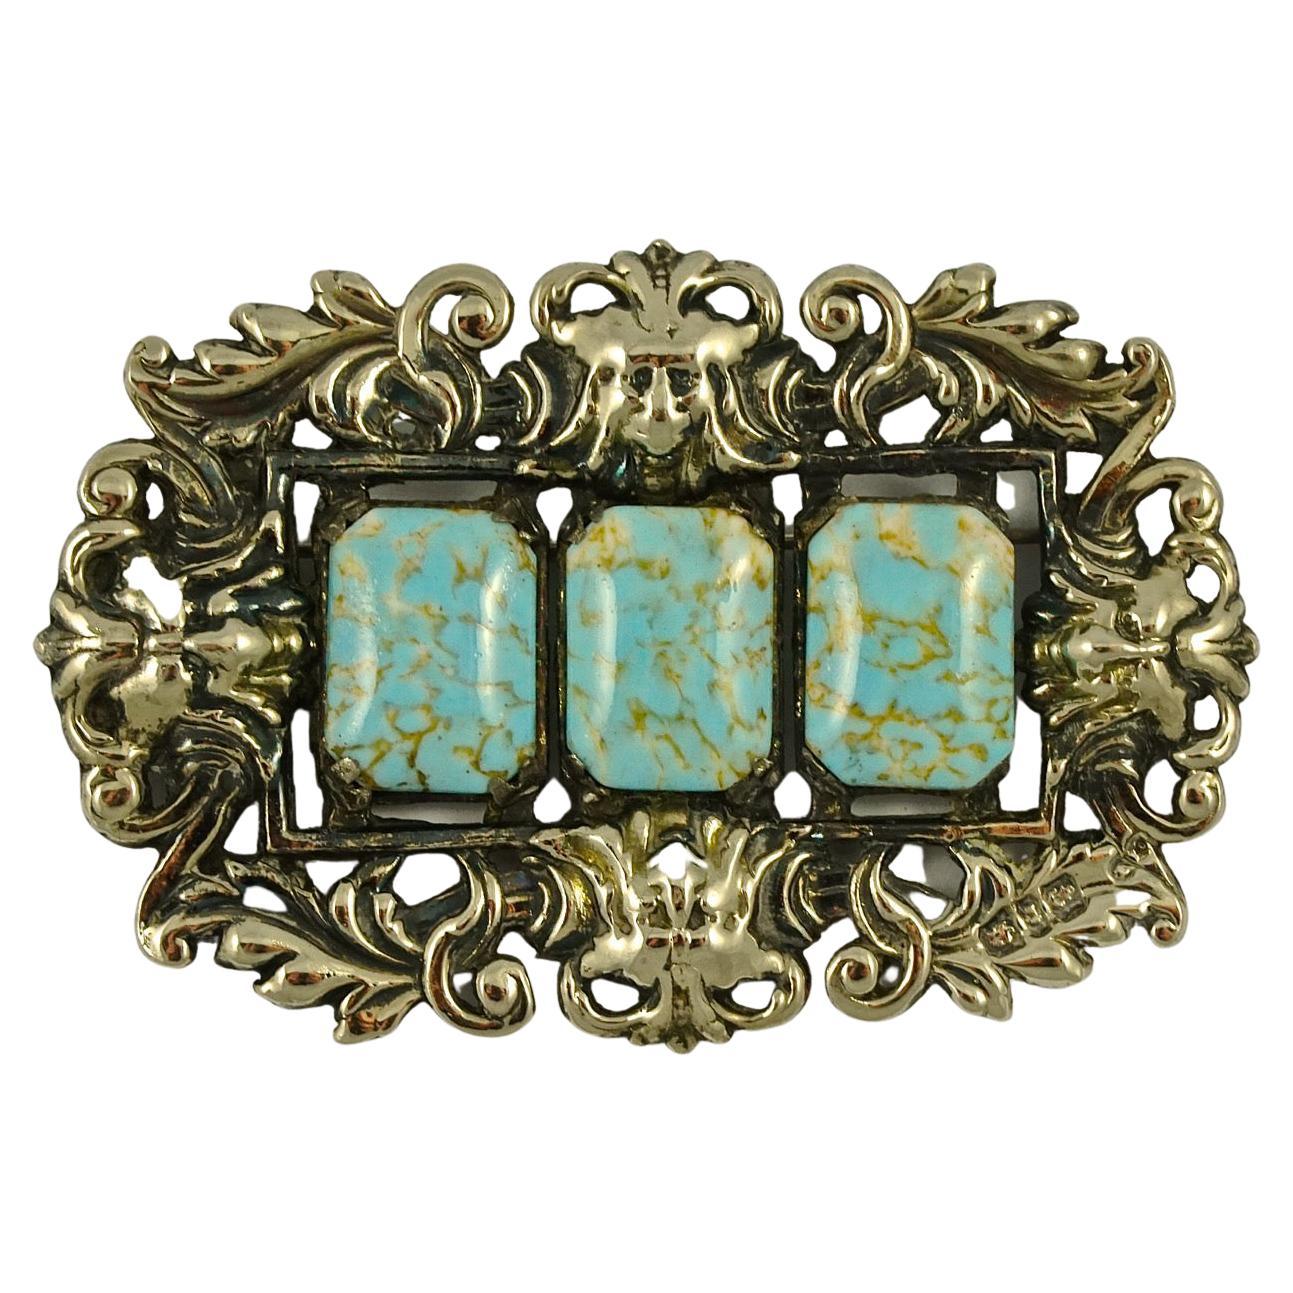 Antique Sterling Silver Statement Brooch with Three Faux Turquoise Stones